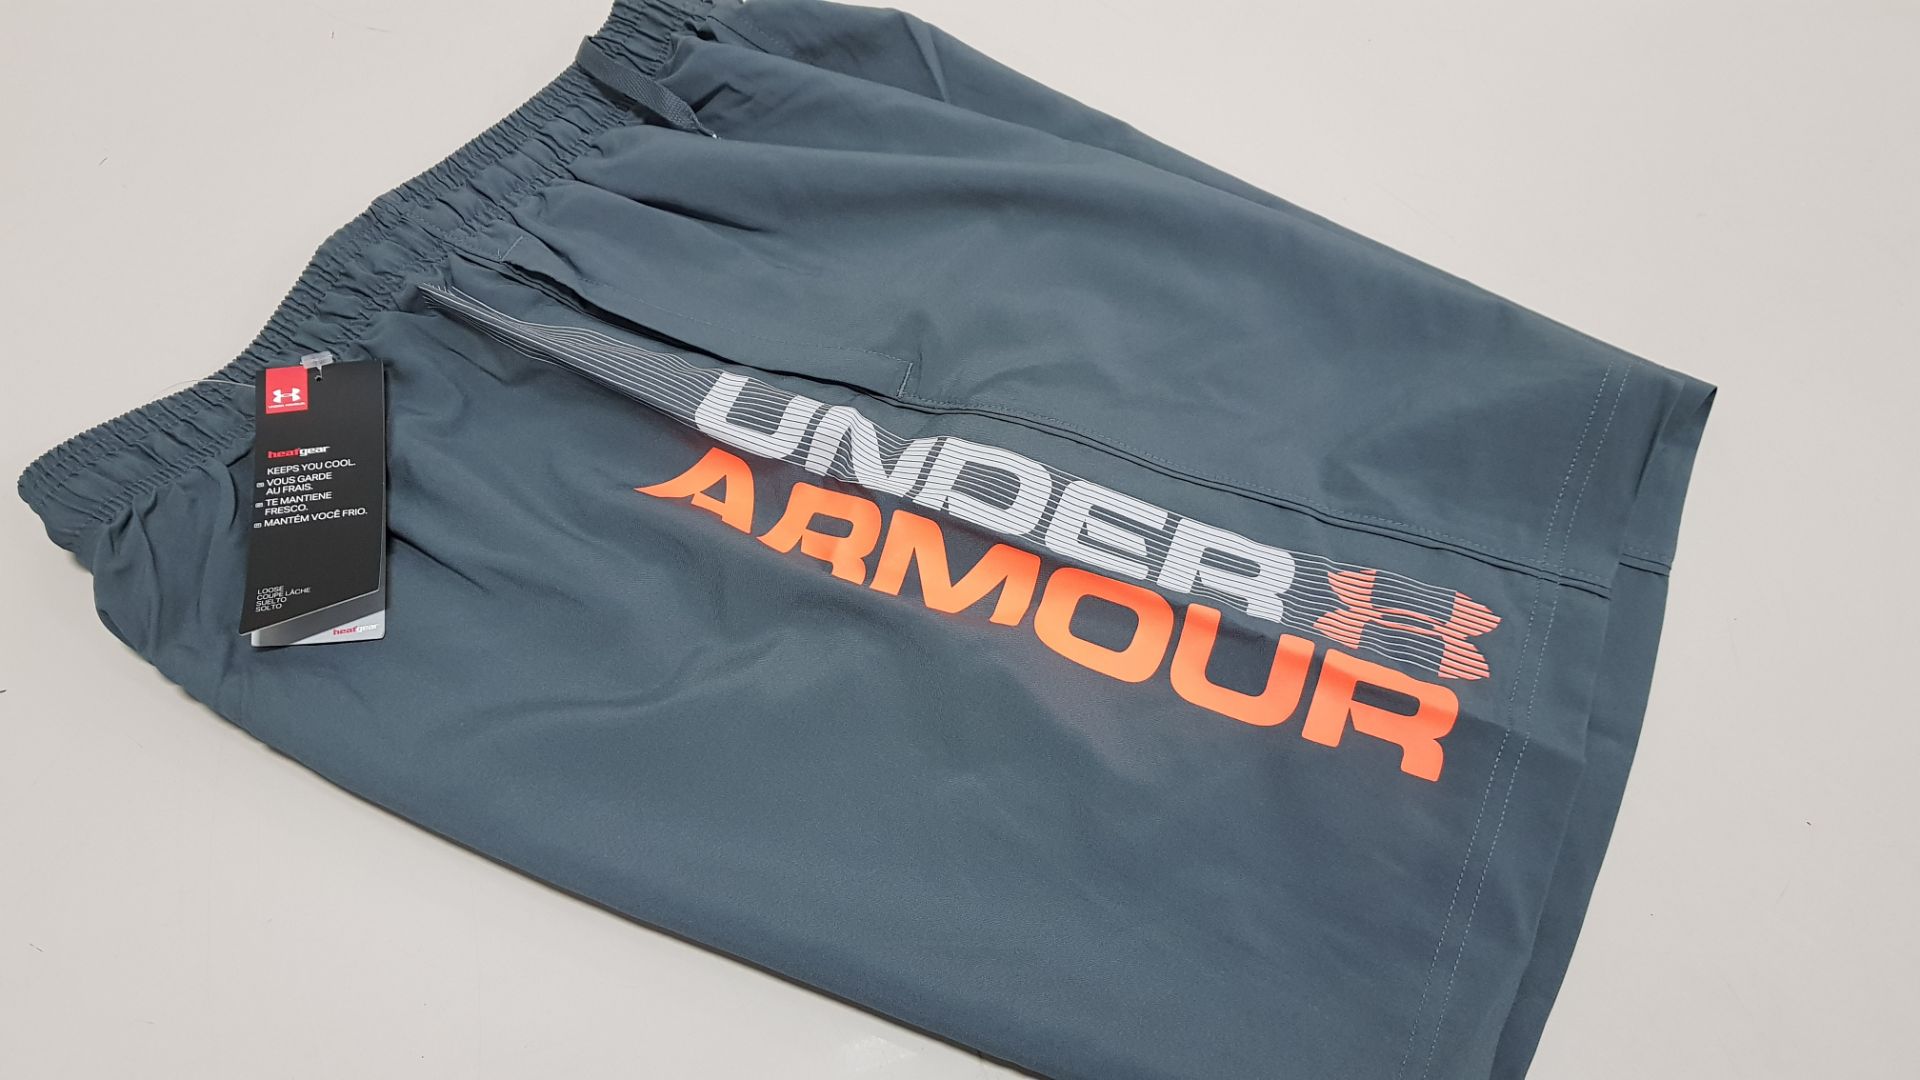 15 X BRAND NEW BAGGED UNDER ARMOUR GREY WOVEN GRAPH SHORTS IN SIZE SMALL - PICK LOOSE TOTAL RRP £